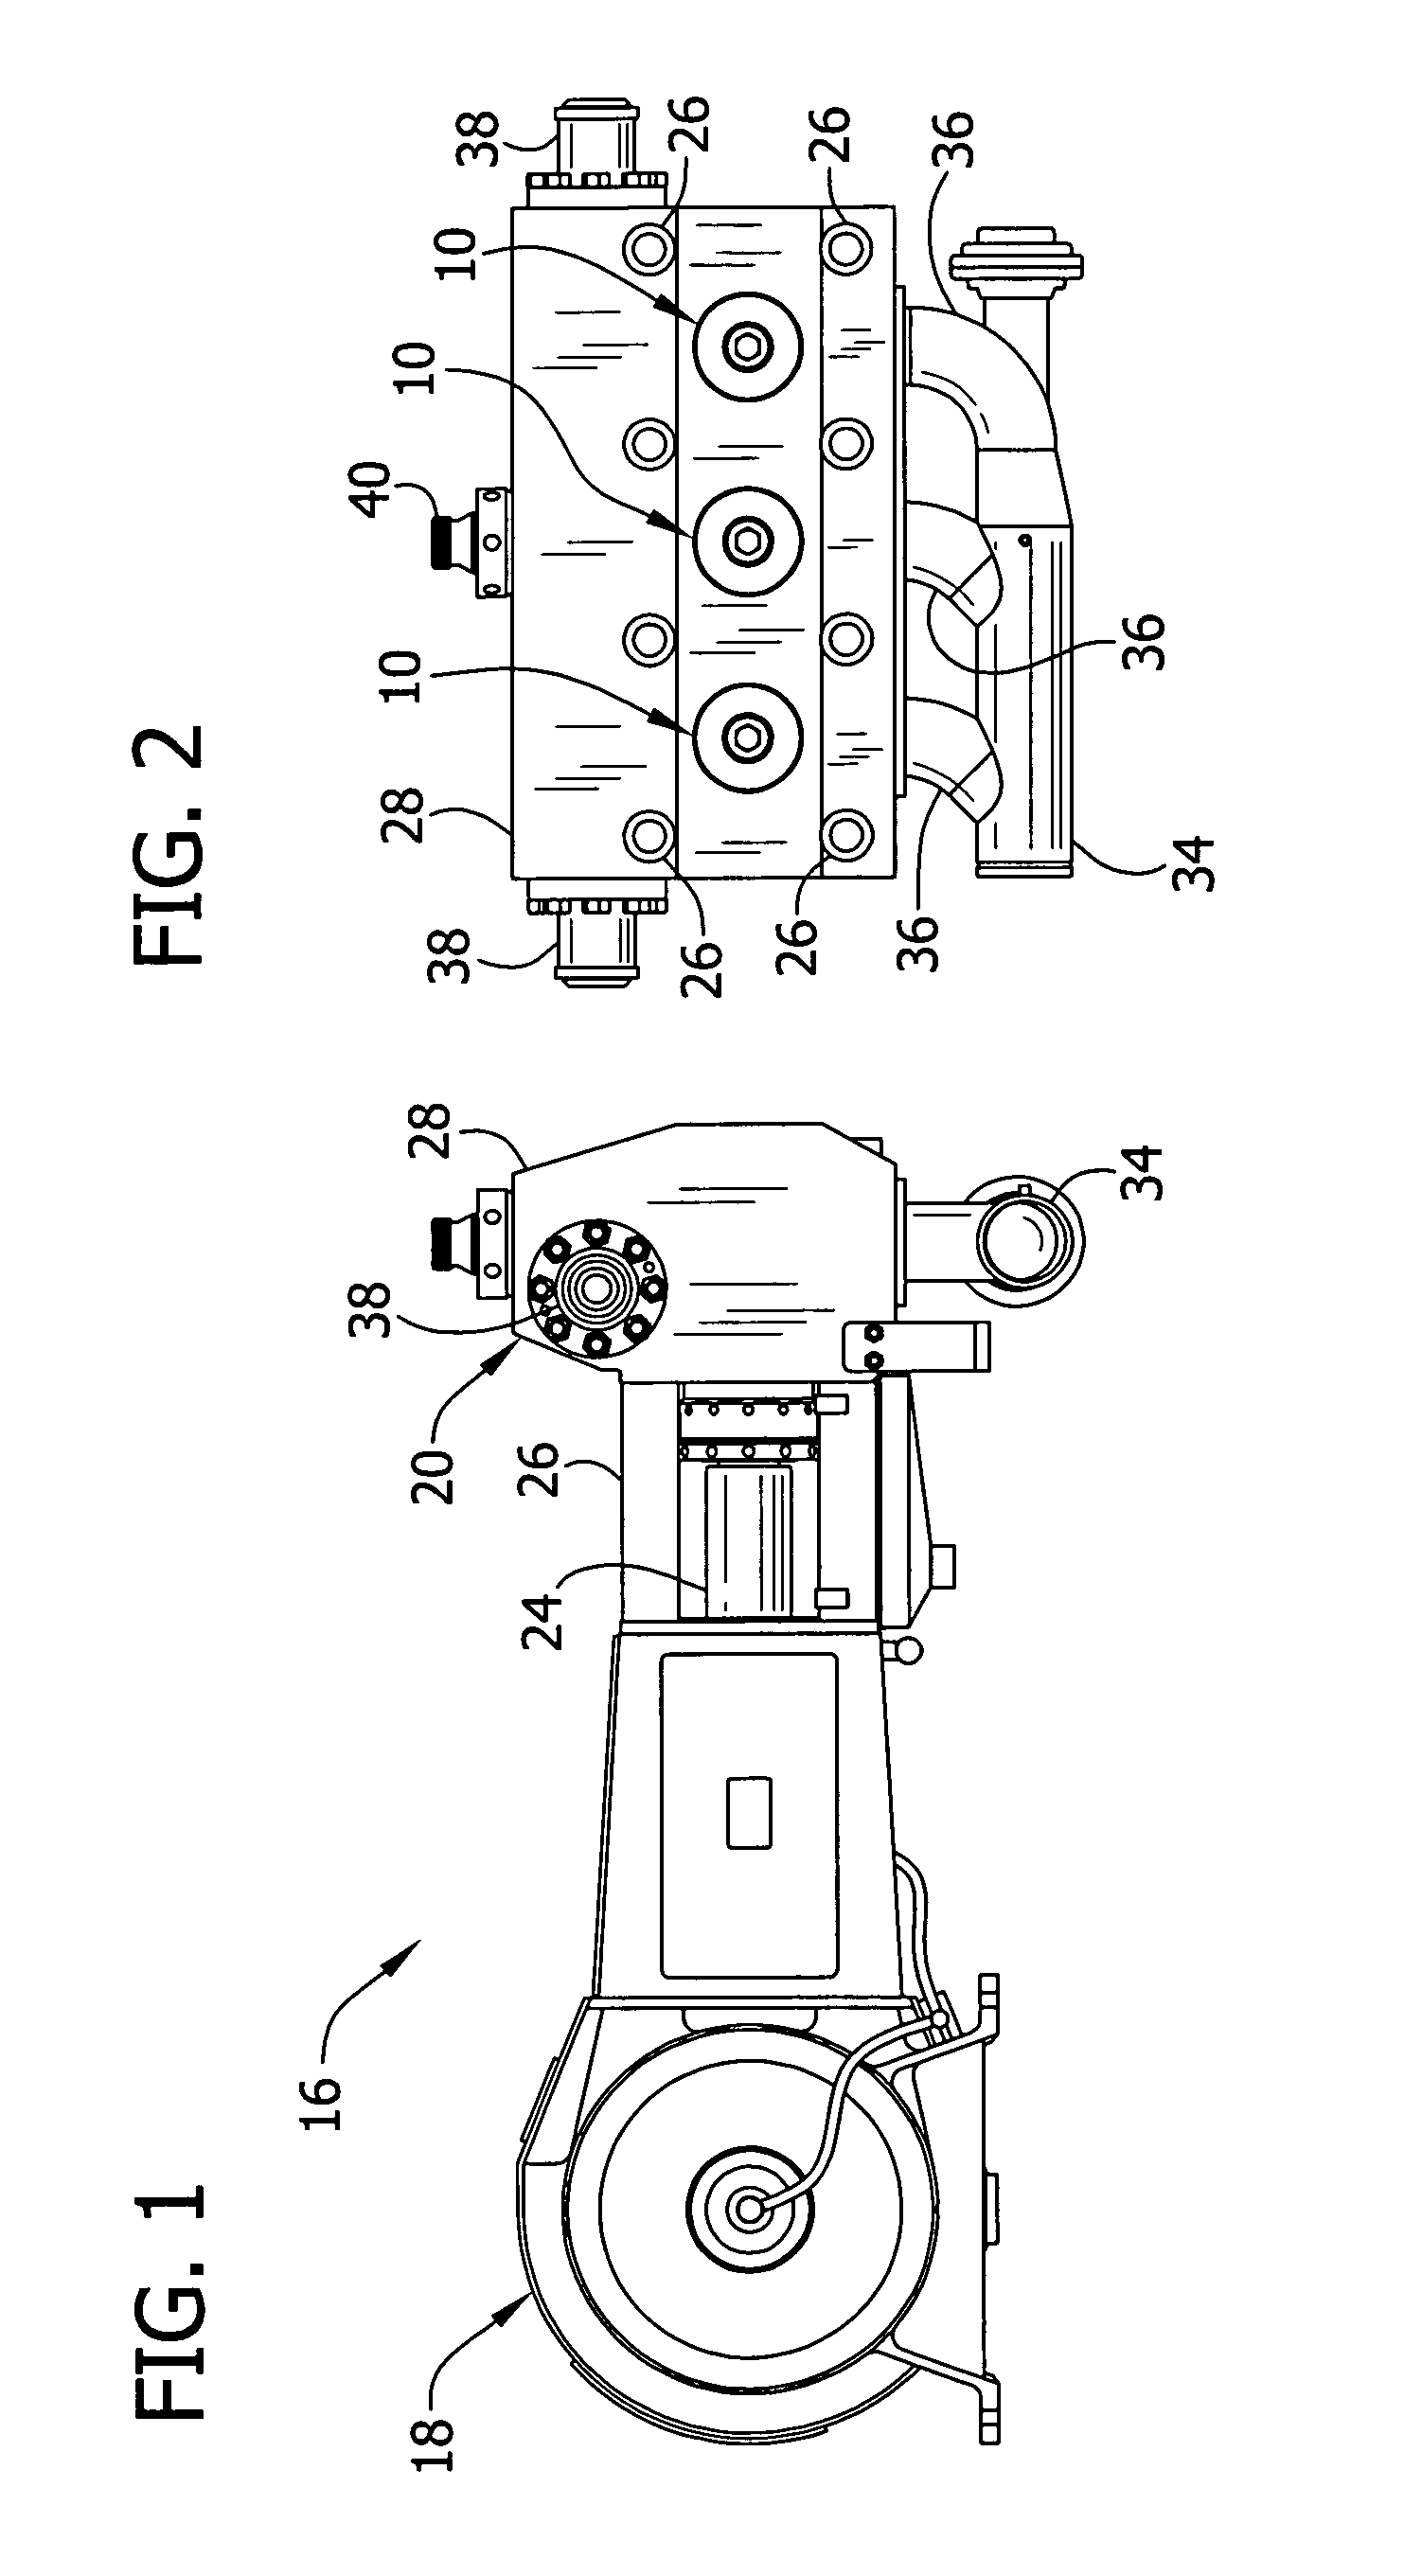 Self-tightening cover for pump